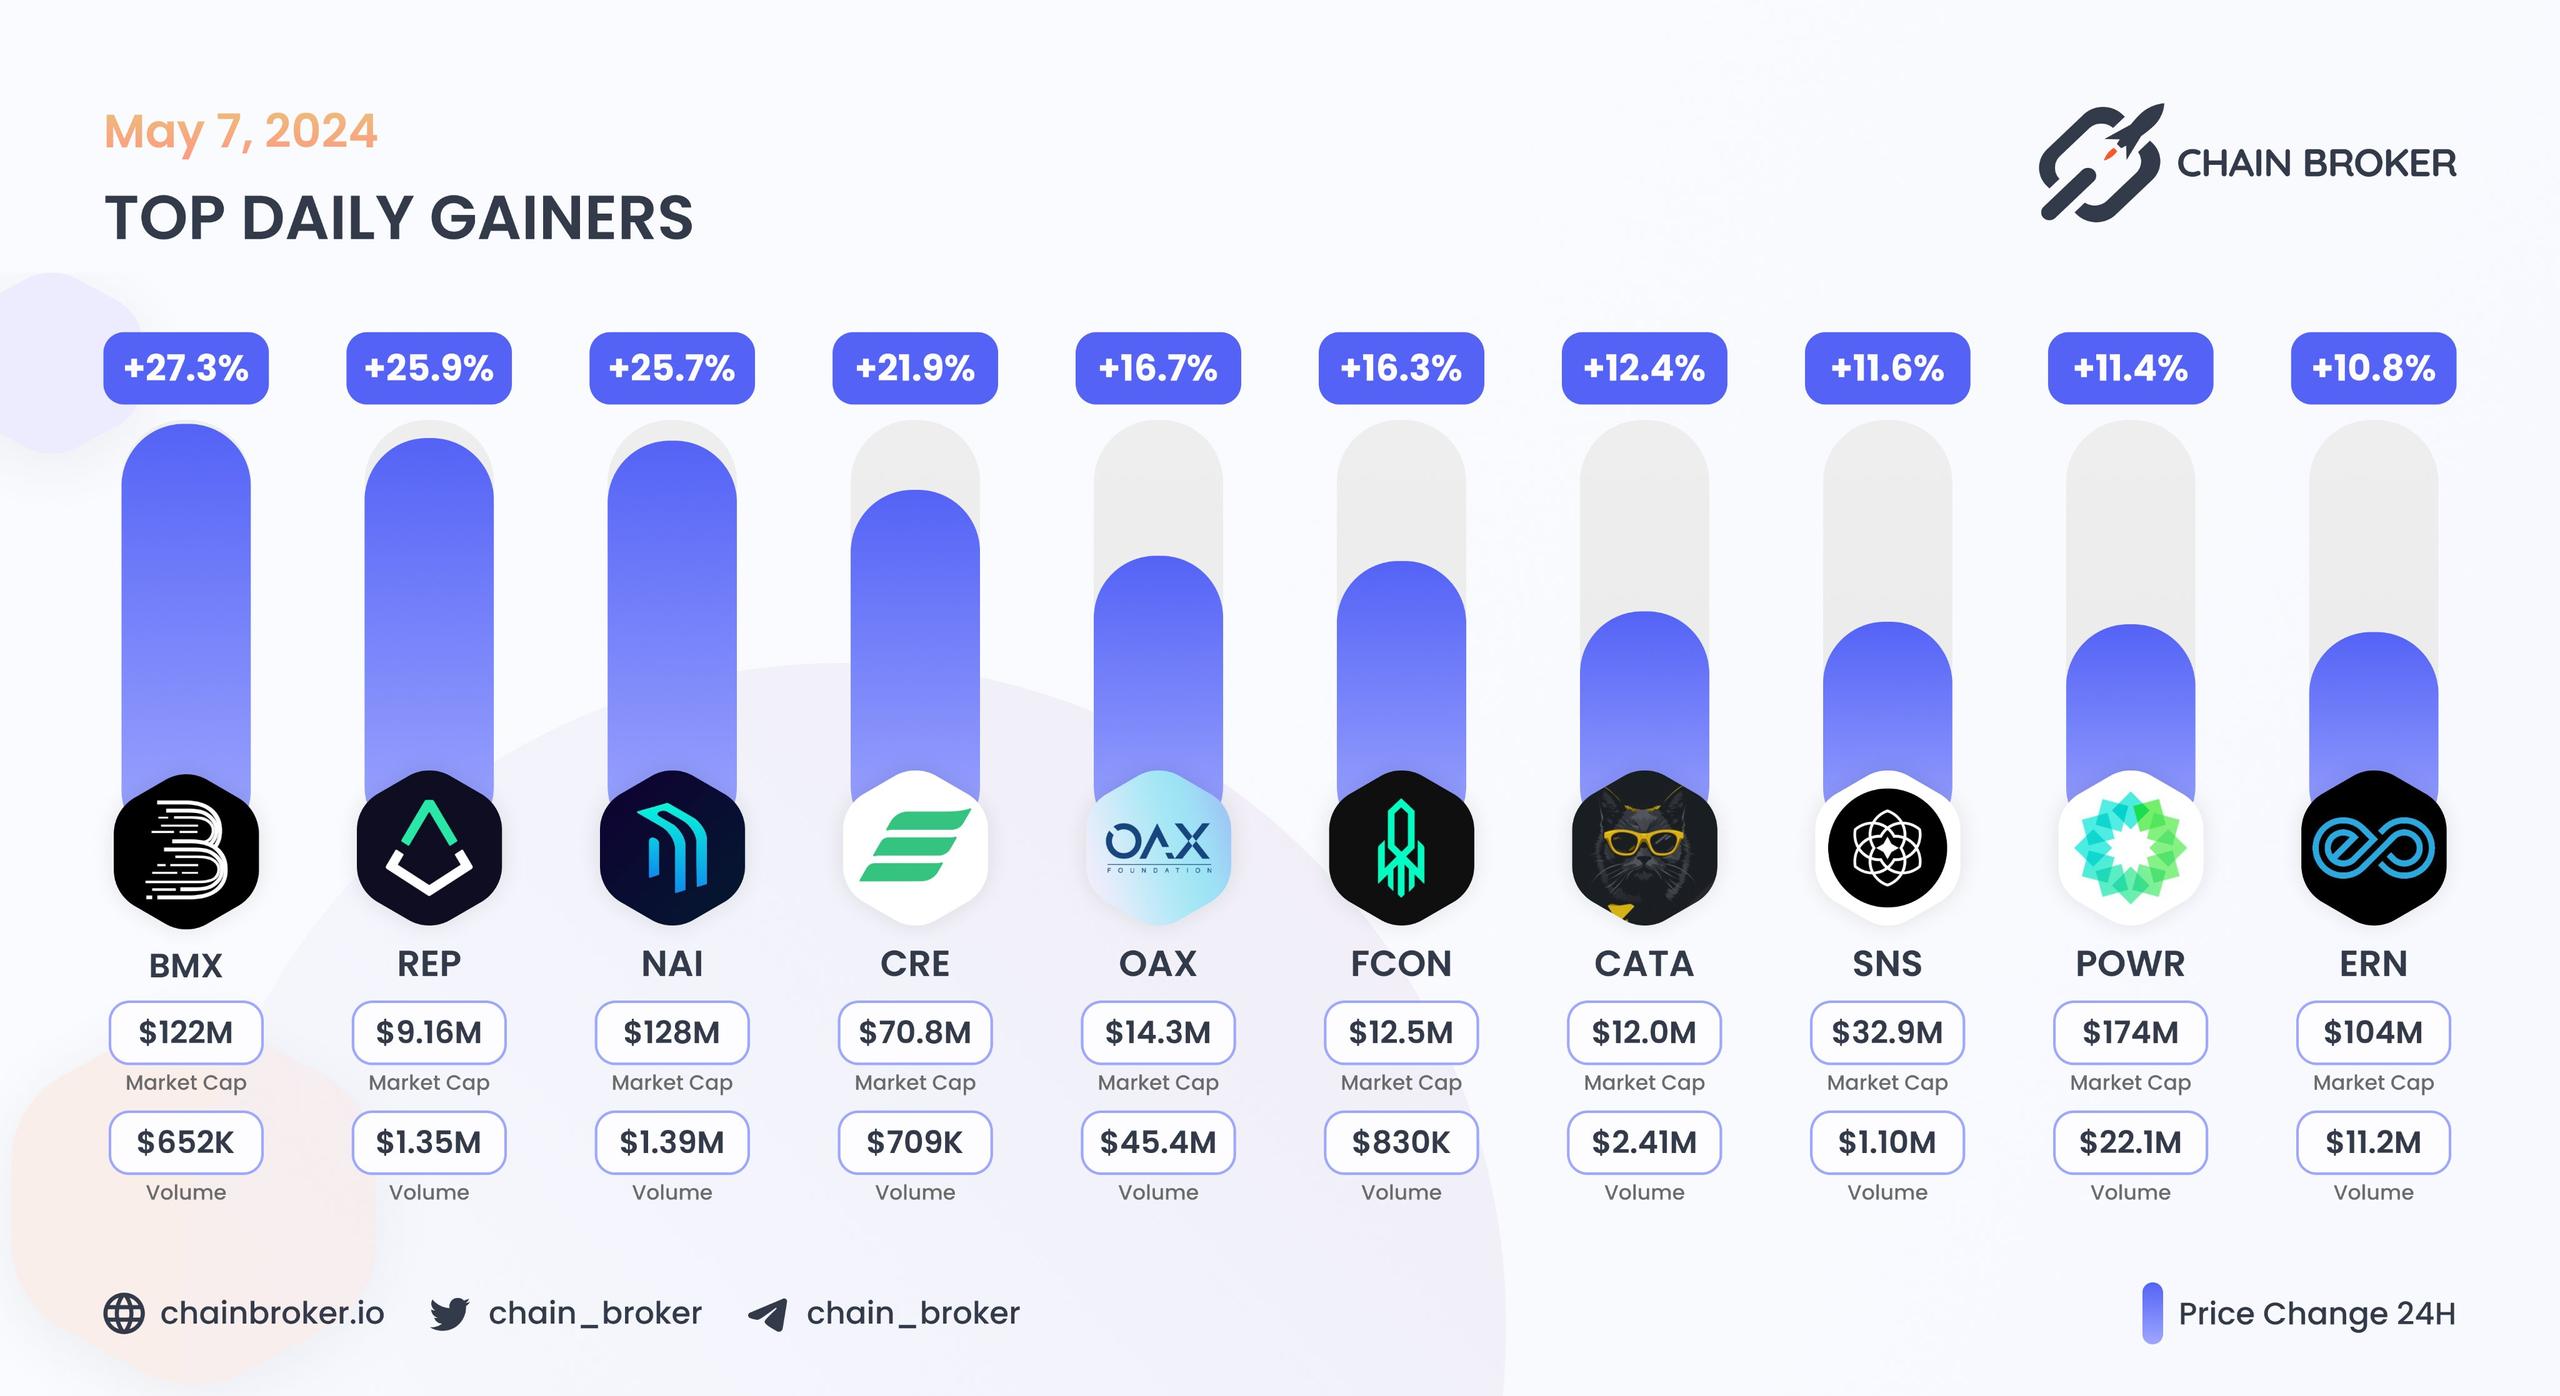 Top daily gainers